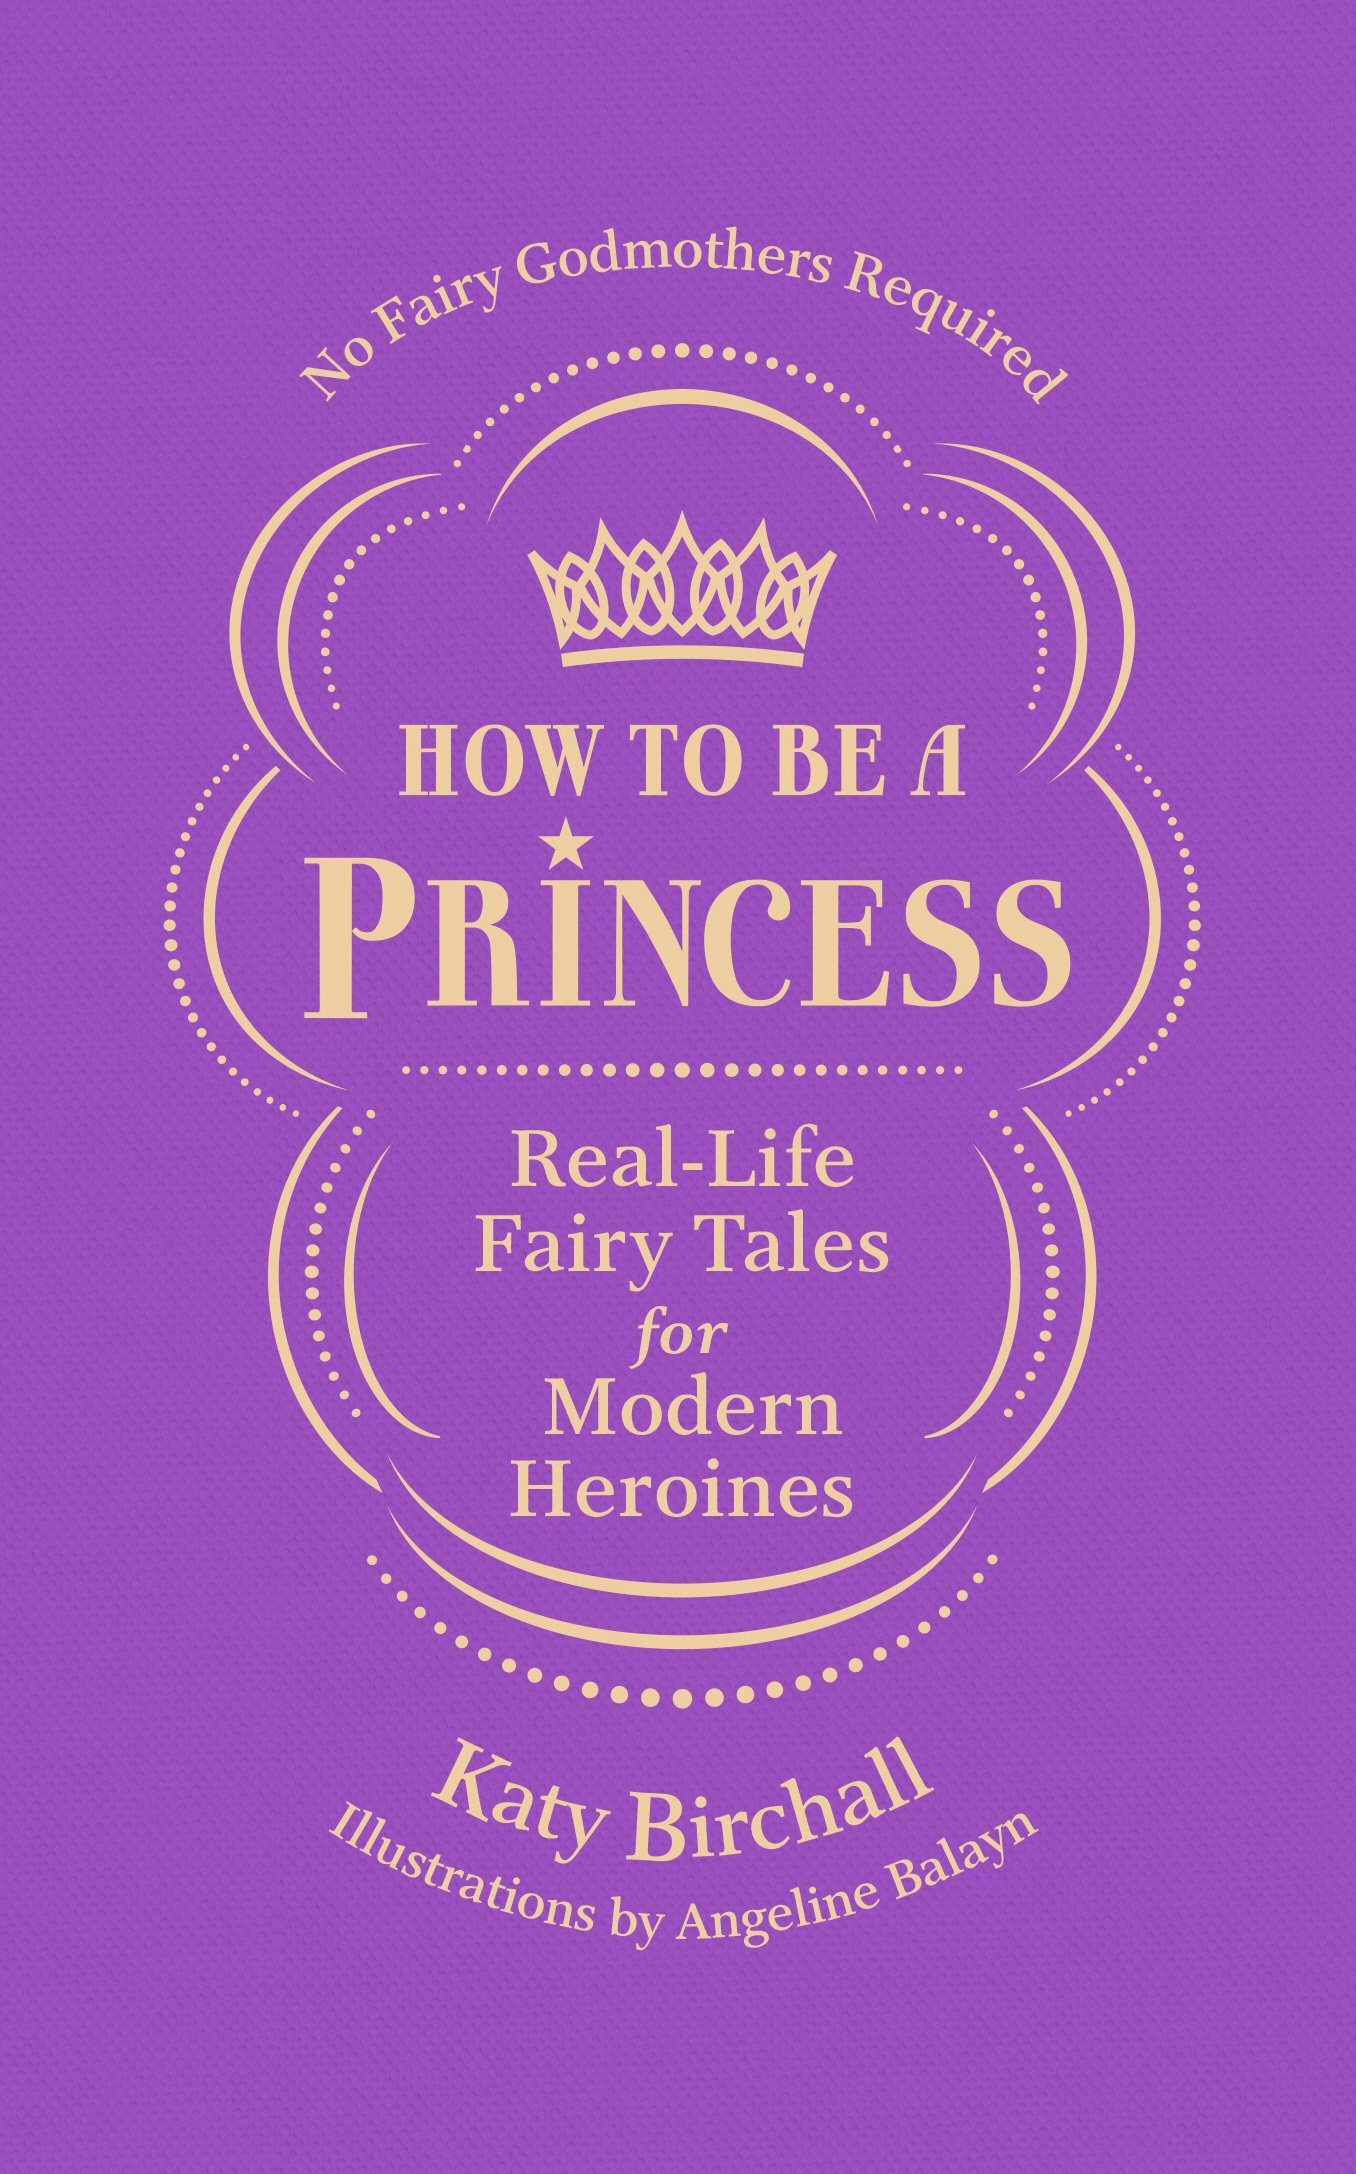 How to be a Princess: Real-Life Fairy Tales for Modern Heroines